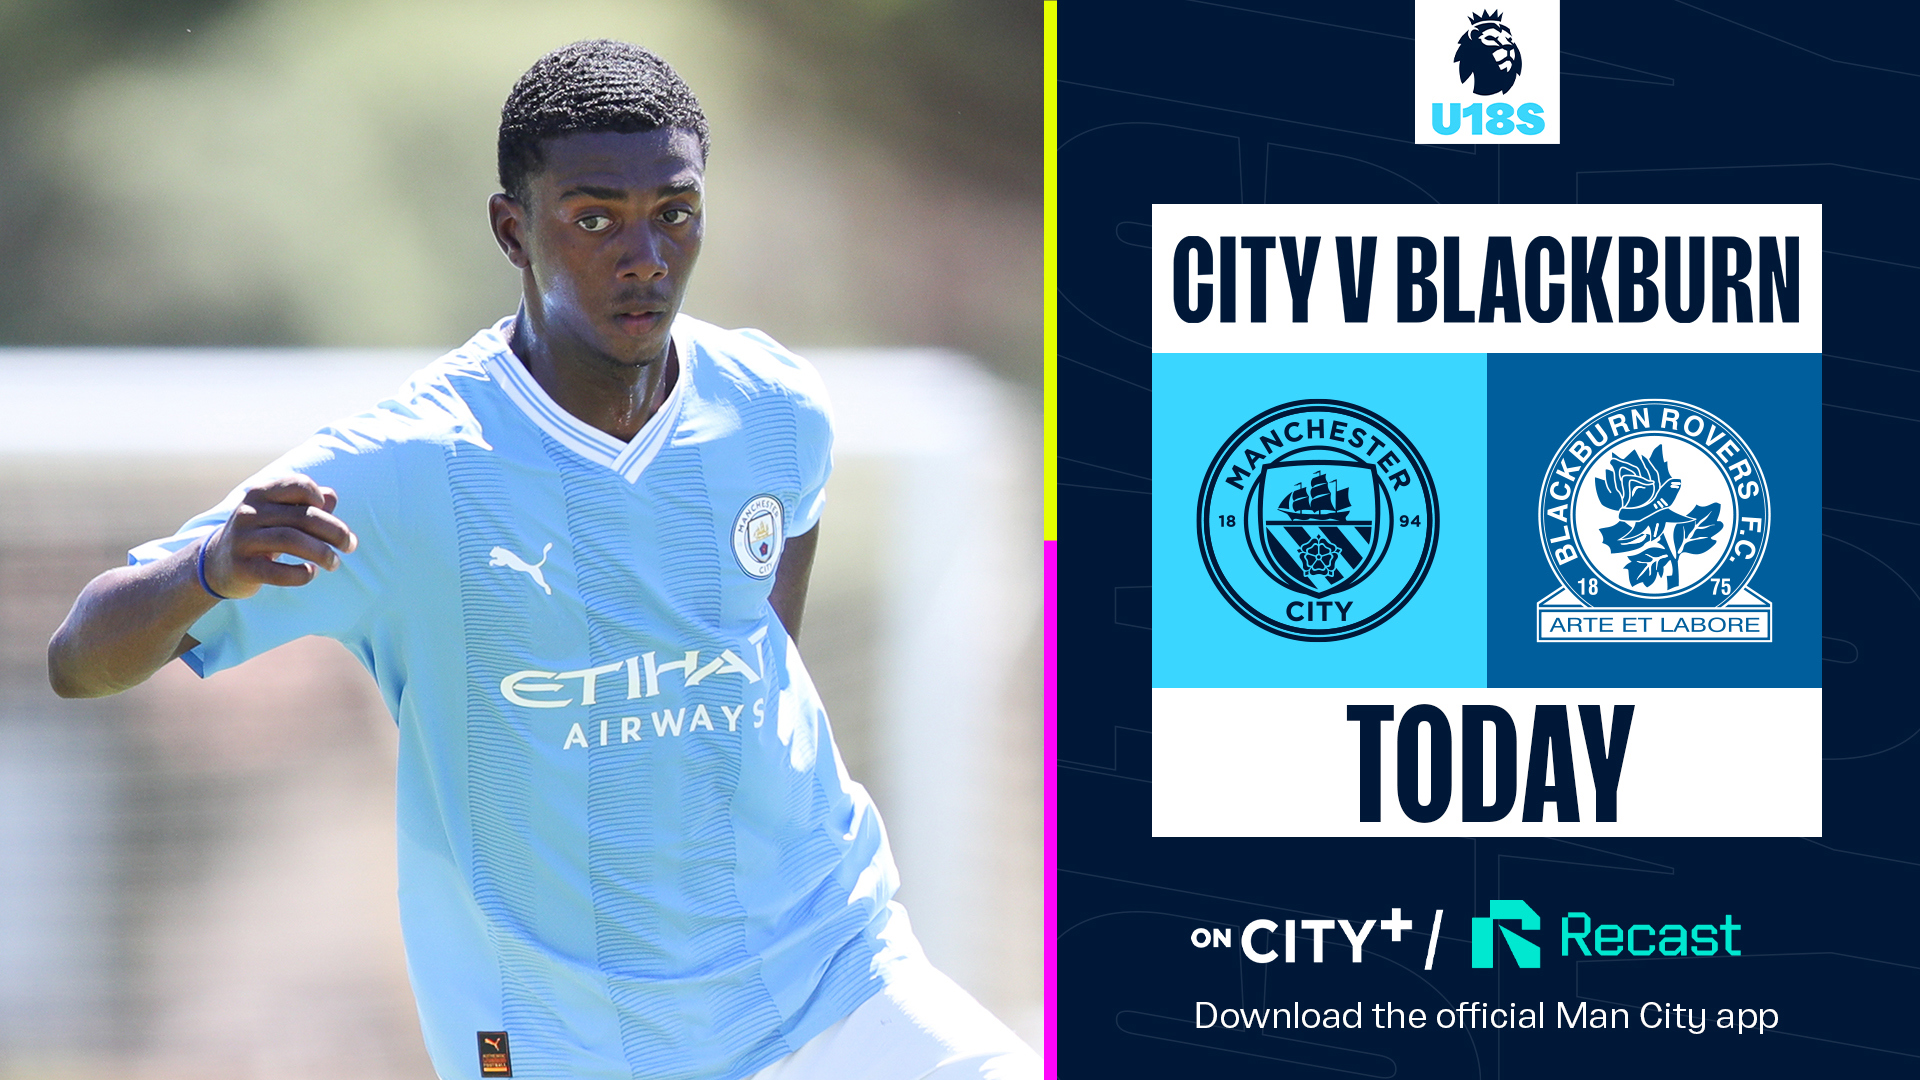 Watch the Under-18s first game of the 2023/24 season live on CITY+ and Recast